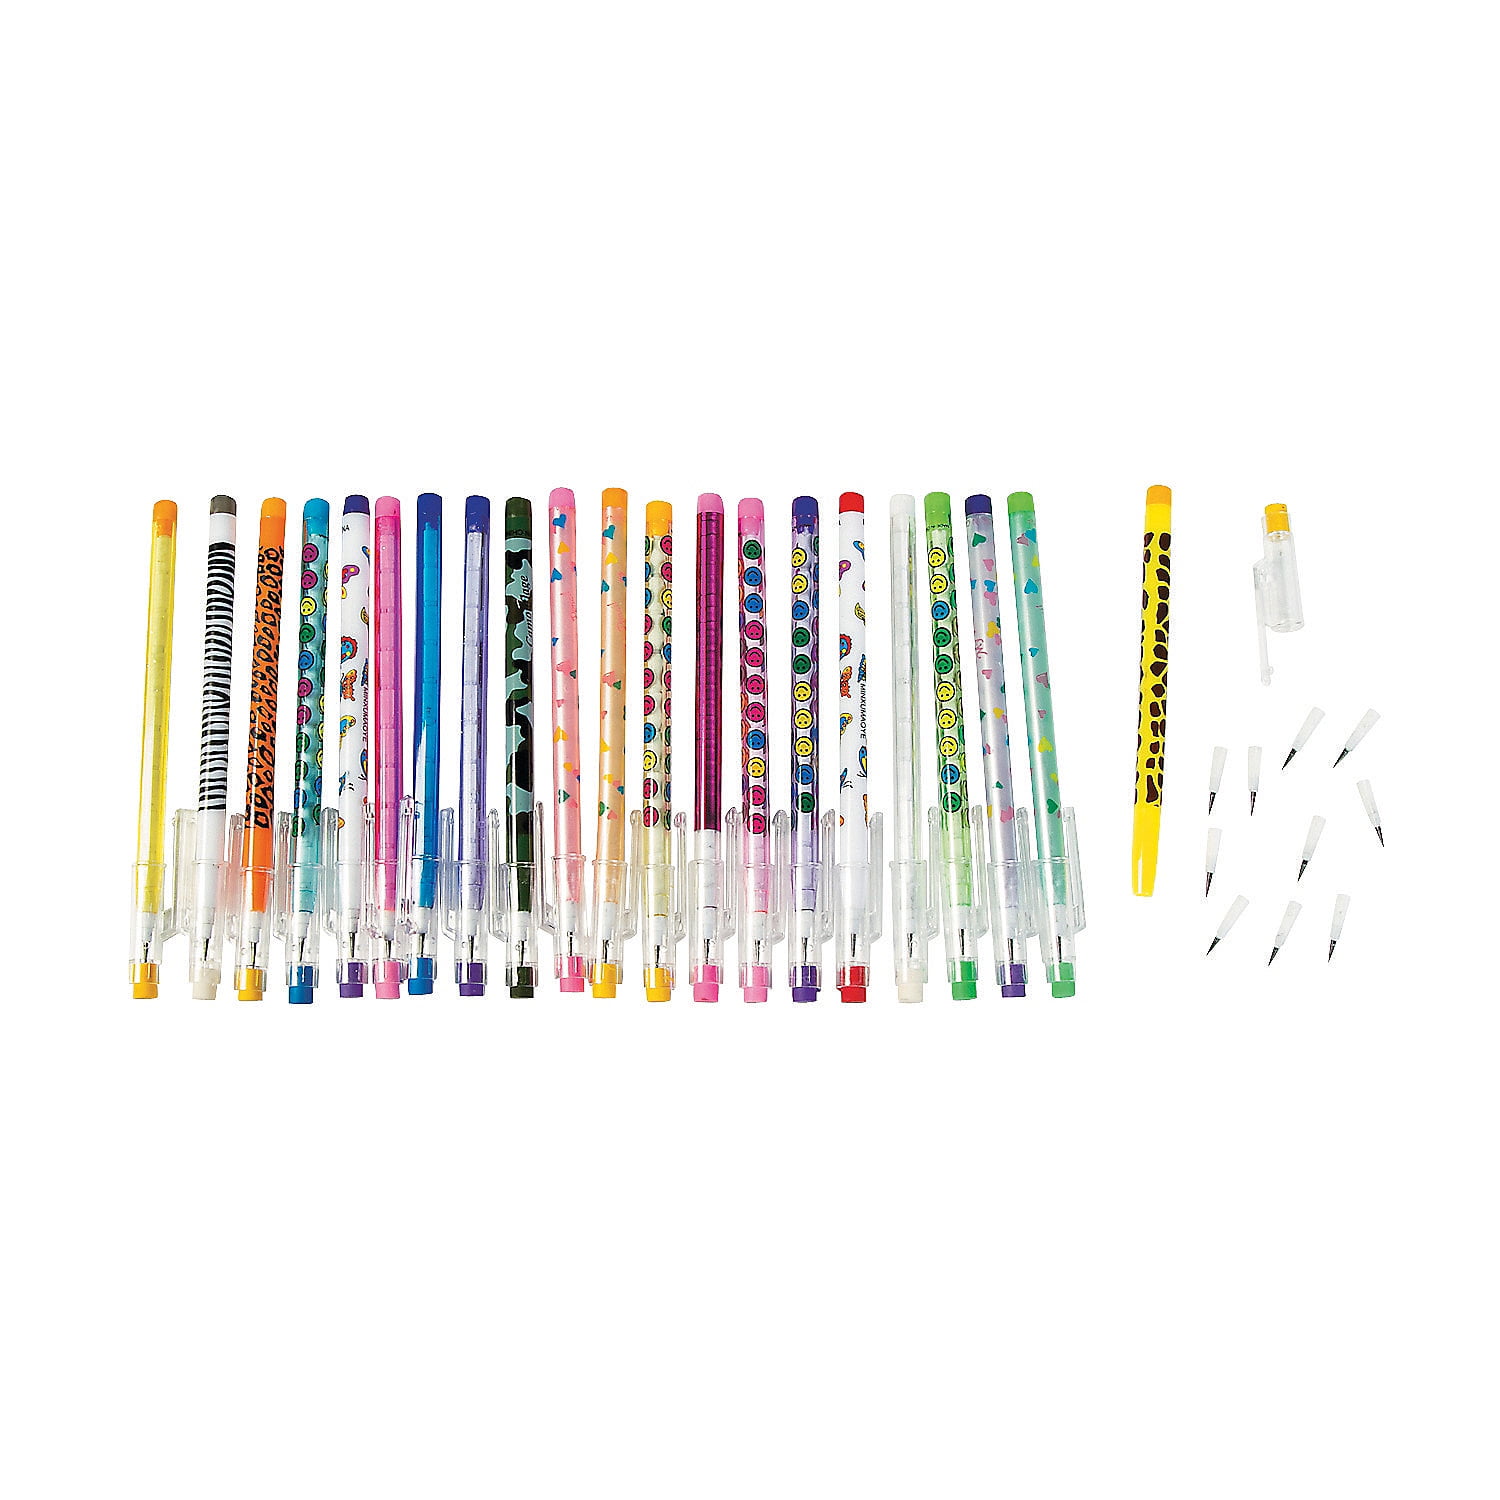 Aryellys Pop a Point Pencil 50 Pack Stacking Push Points Pencils